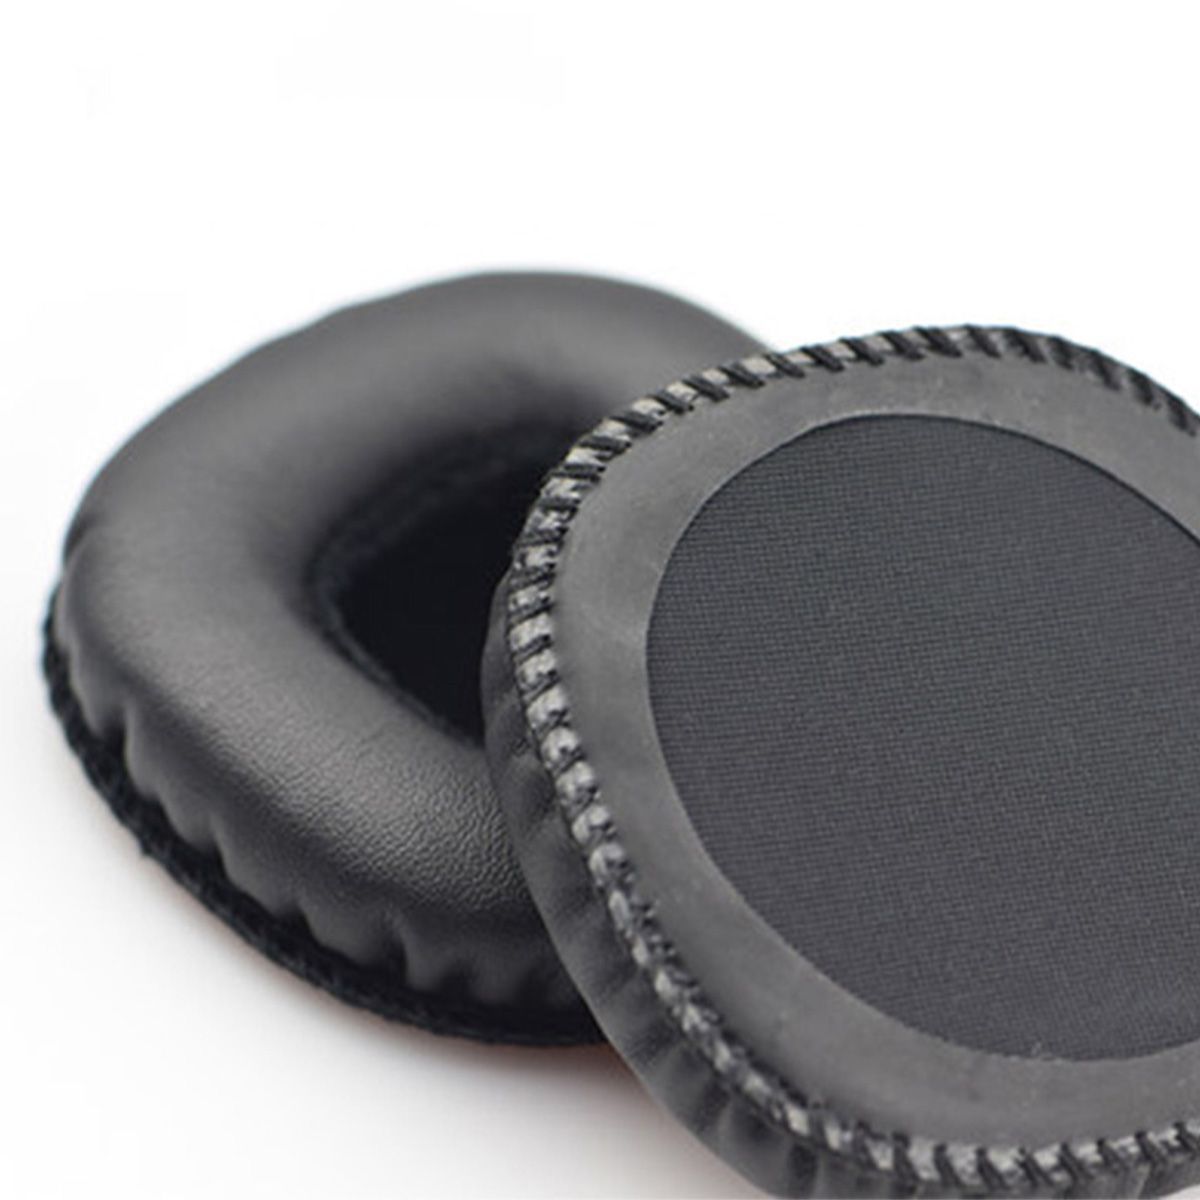 2Pcs-Replacement-Earpads-Earphone-Cushion-Cover-for-MID-ANC-Headphone-1573376